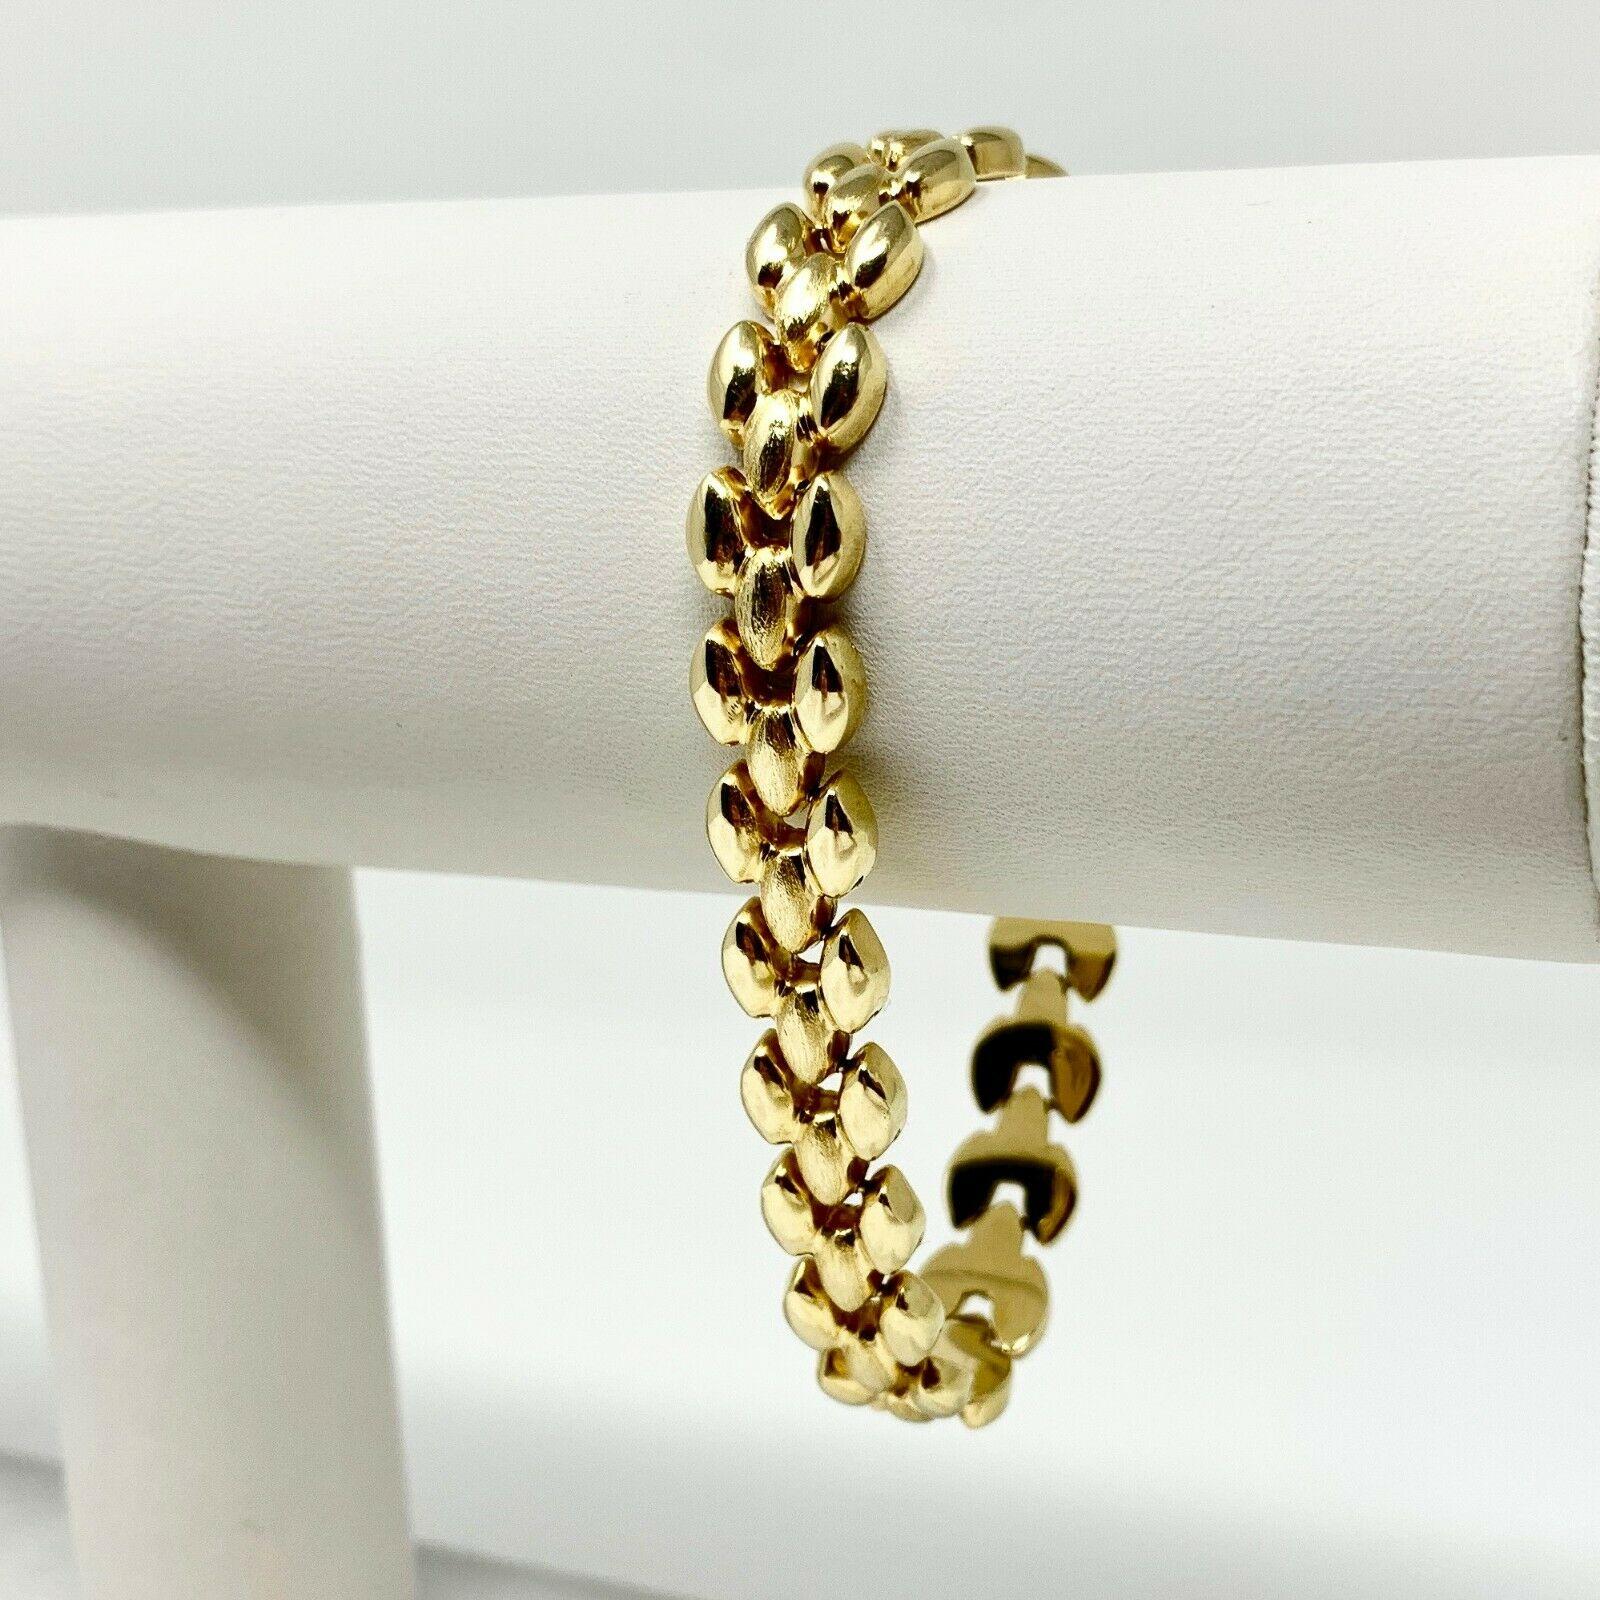 14k Yellow Gold Fancy Panther Link Chain Bracelet Italy 7.5 Inches

Condition:  Excellent (Professionally Cleaned and Polished)
Metal:  14k Gold (Marked, and Professionally Tested)
Weight:  14.3g
Length:  7.5 Inches Wearable Length
Width: 